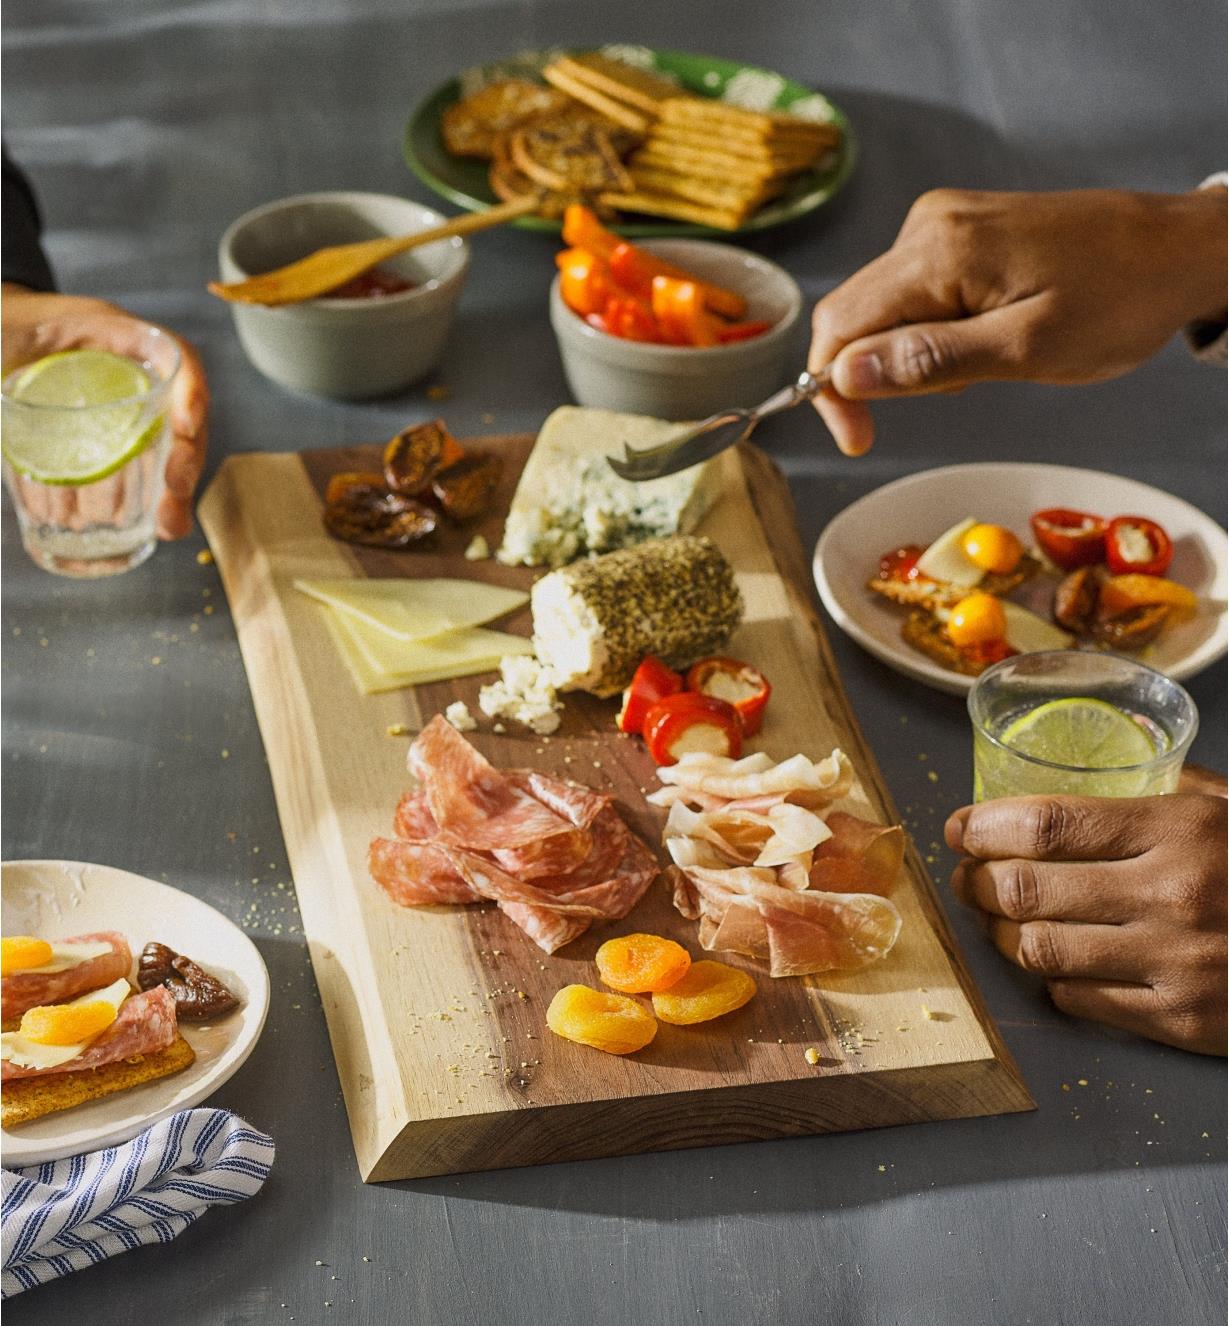 Two people sharing a variety of cheese, cured meats, nuts and fruit arranged on the charcuterie board